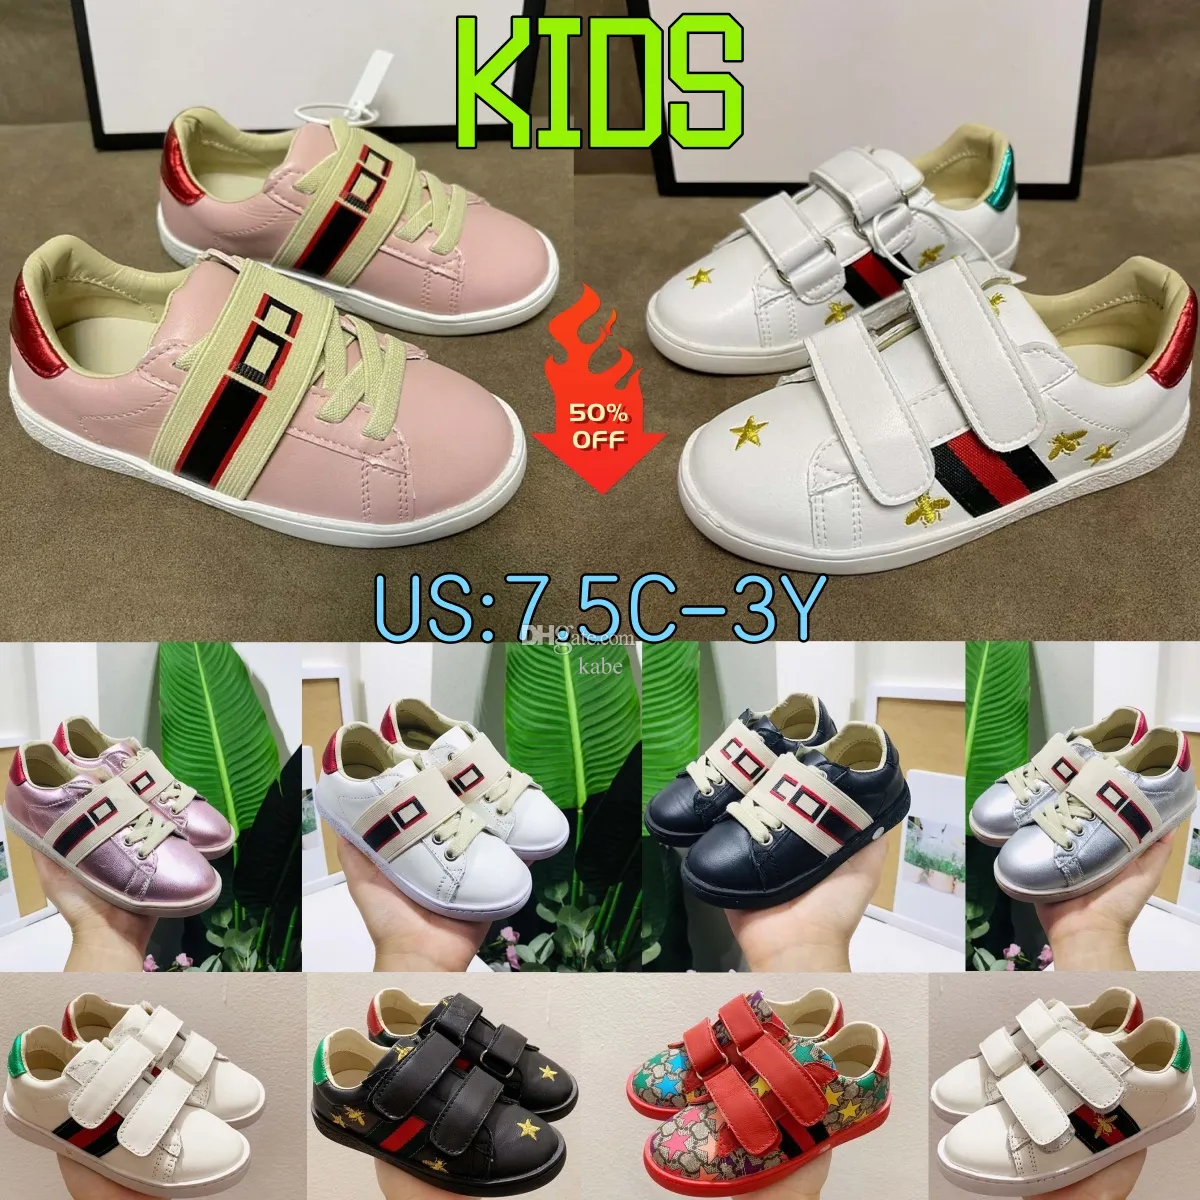 Girls Star Shoes Chirdren Italy Bee Casual Shoe White Flat Leather Shoe Green Red Stripe Embroidered Sport Snake Storlek 26-35